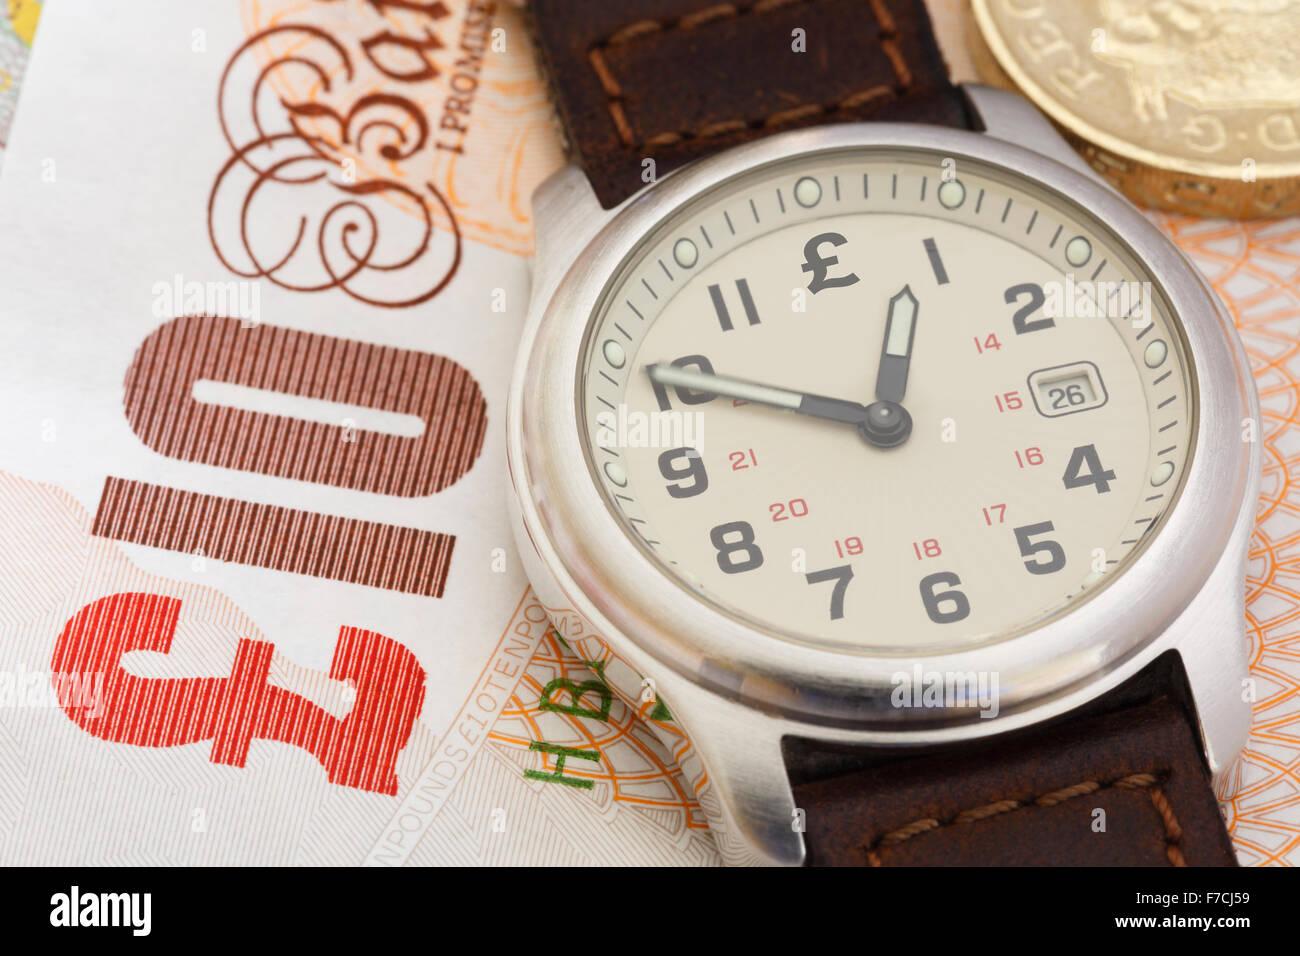 Wristwatch on a ten pound note and a coin to illustrate time is money and austerity concept. England, UK, Britain Stock Photo